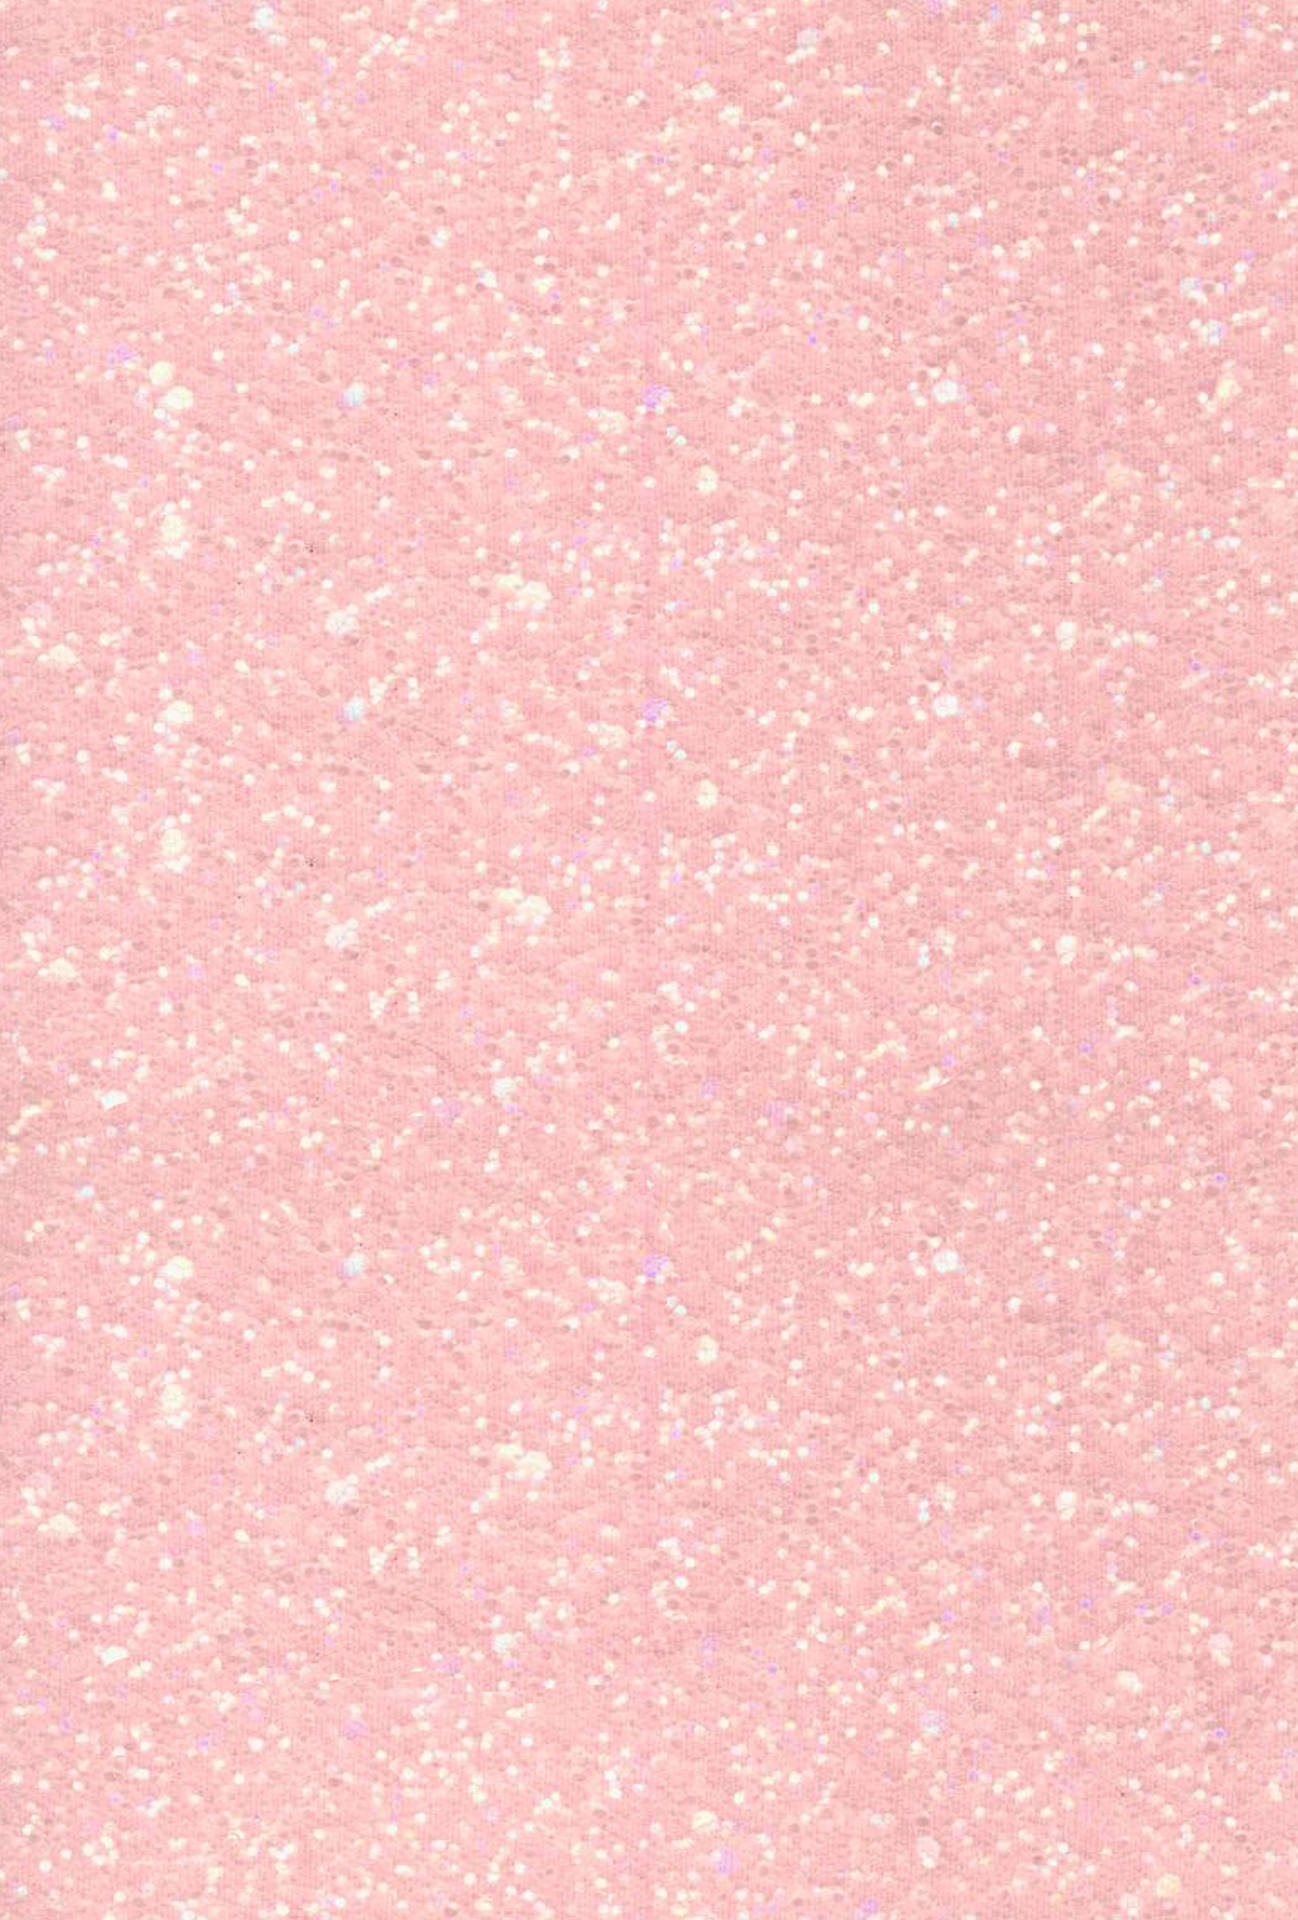 2362X3493 Glitter Wallpaper and Background